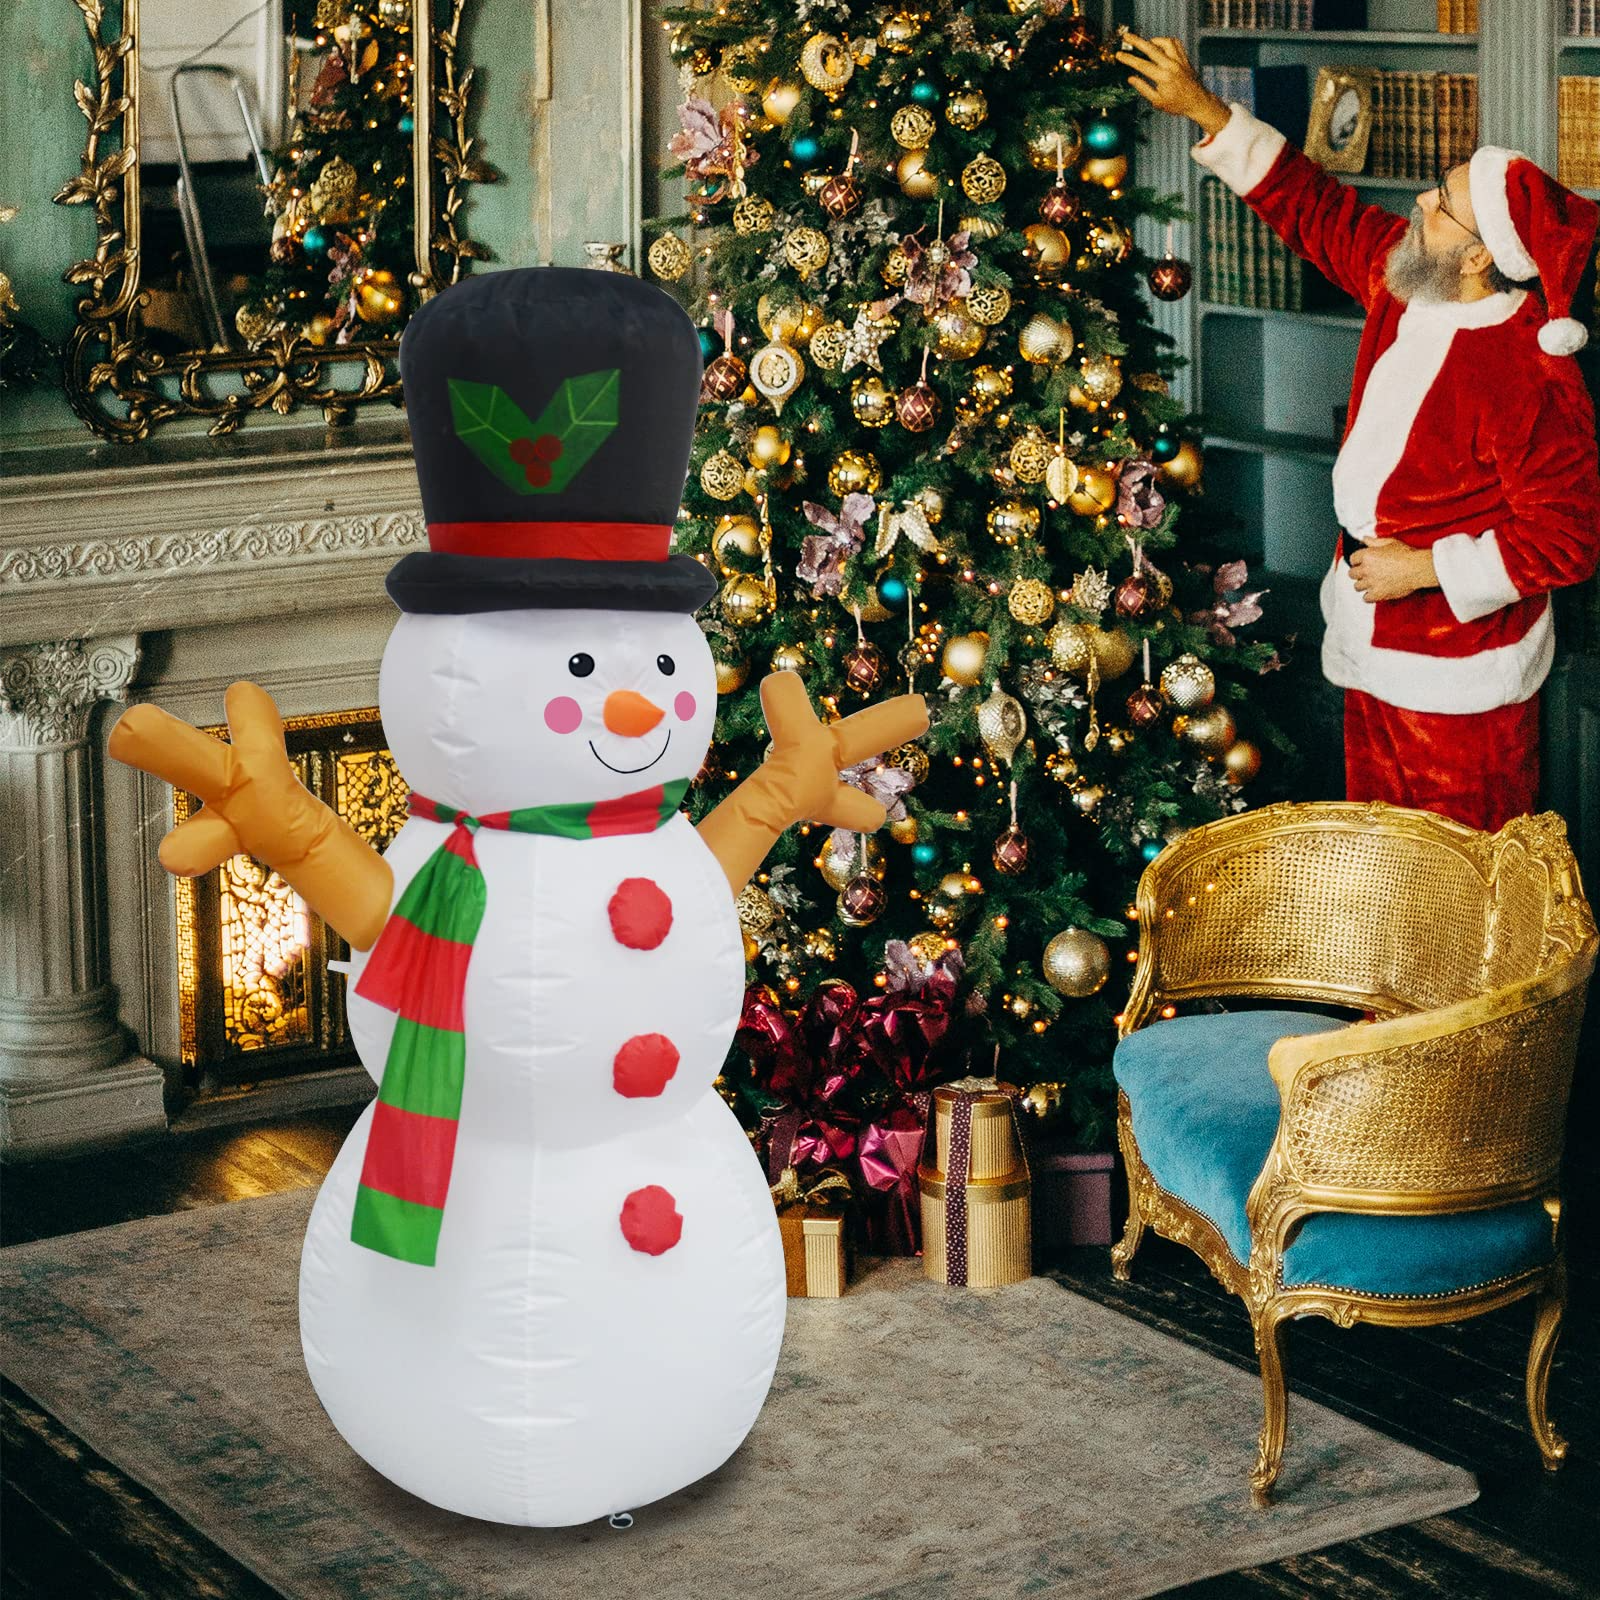 GOOSH 5 FT Christmas Snowman Inflatable Decoration Blow Up Snowman Outdoor  Christmas Yard Decoration with Branch Hand Blow Up Holiday Indoor Outdoor